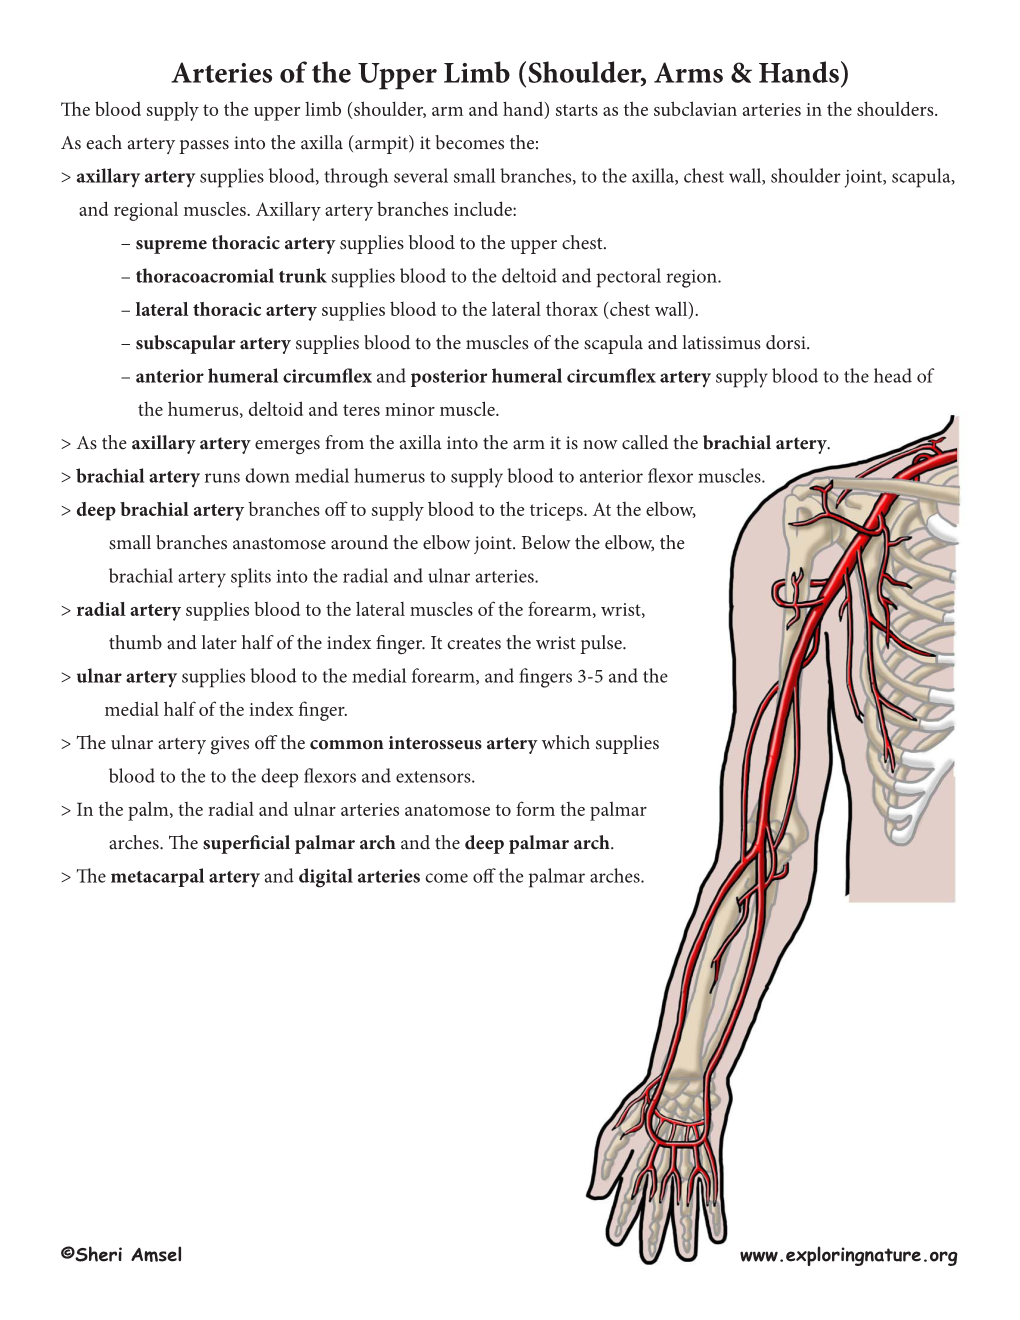 Arteries of the Upper Limb (Shoulder, Arms & Hands) the Blood Supply to the Upper Limb (Shoulder, Arm and Hand) Starts As the Subclavian Arteries in the Shoulders